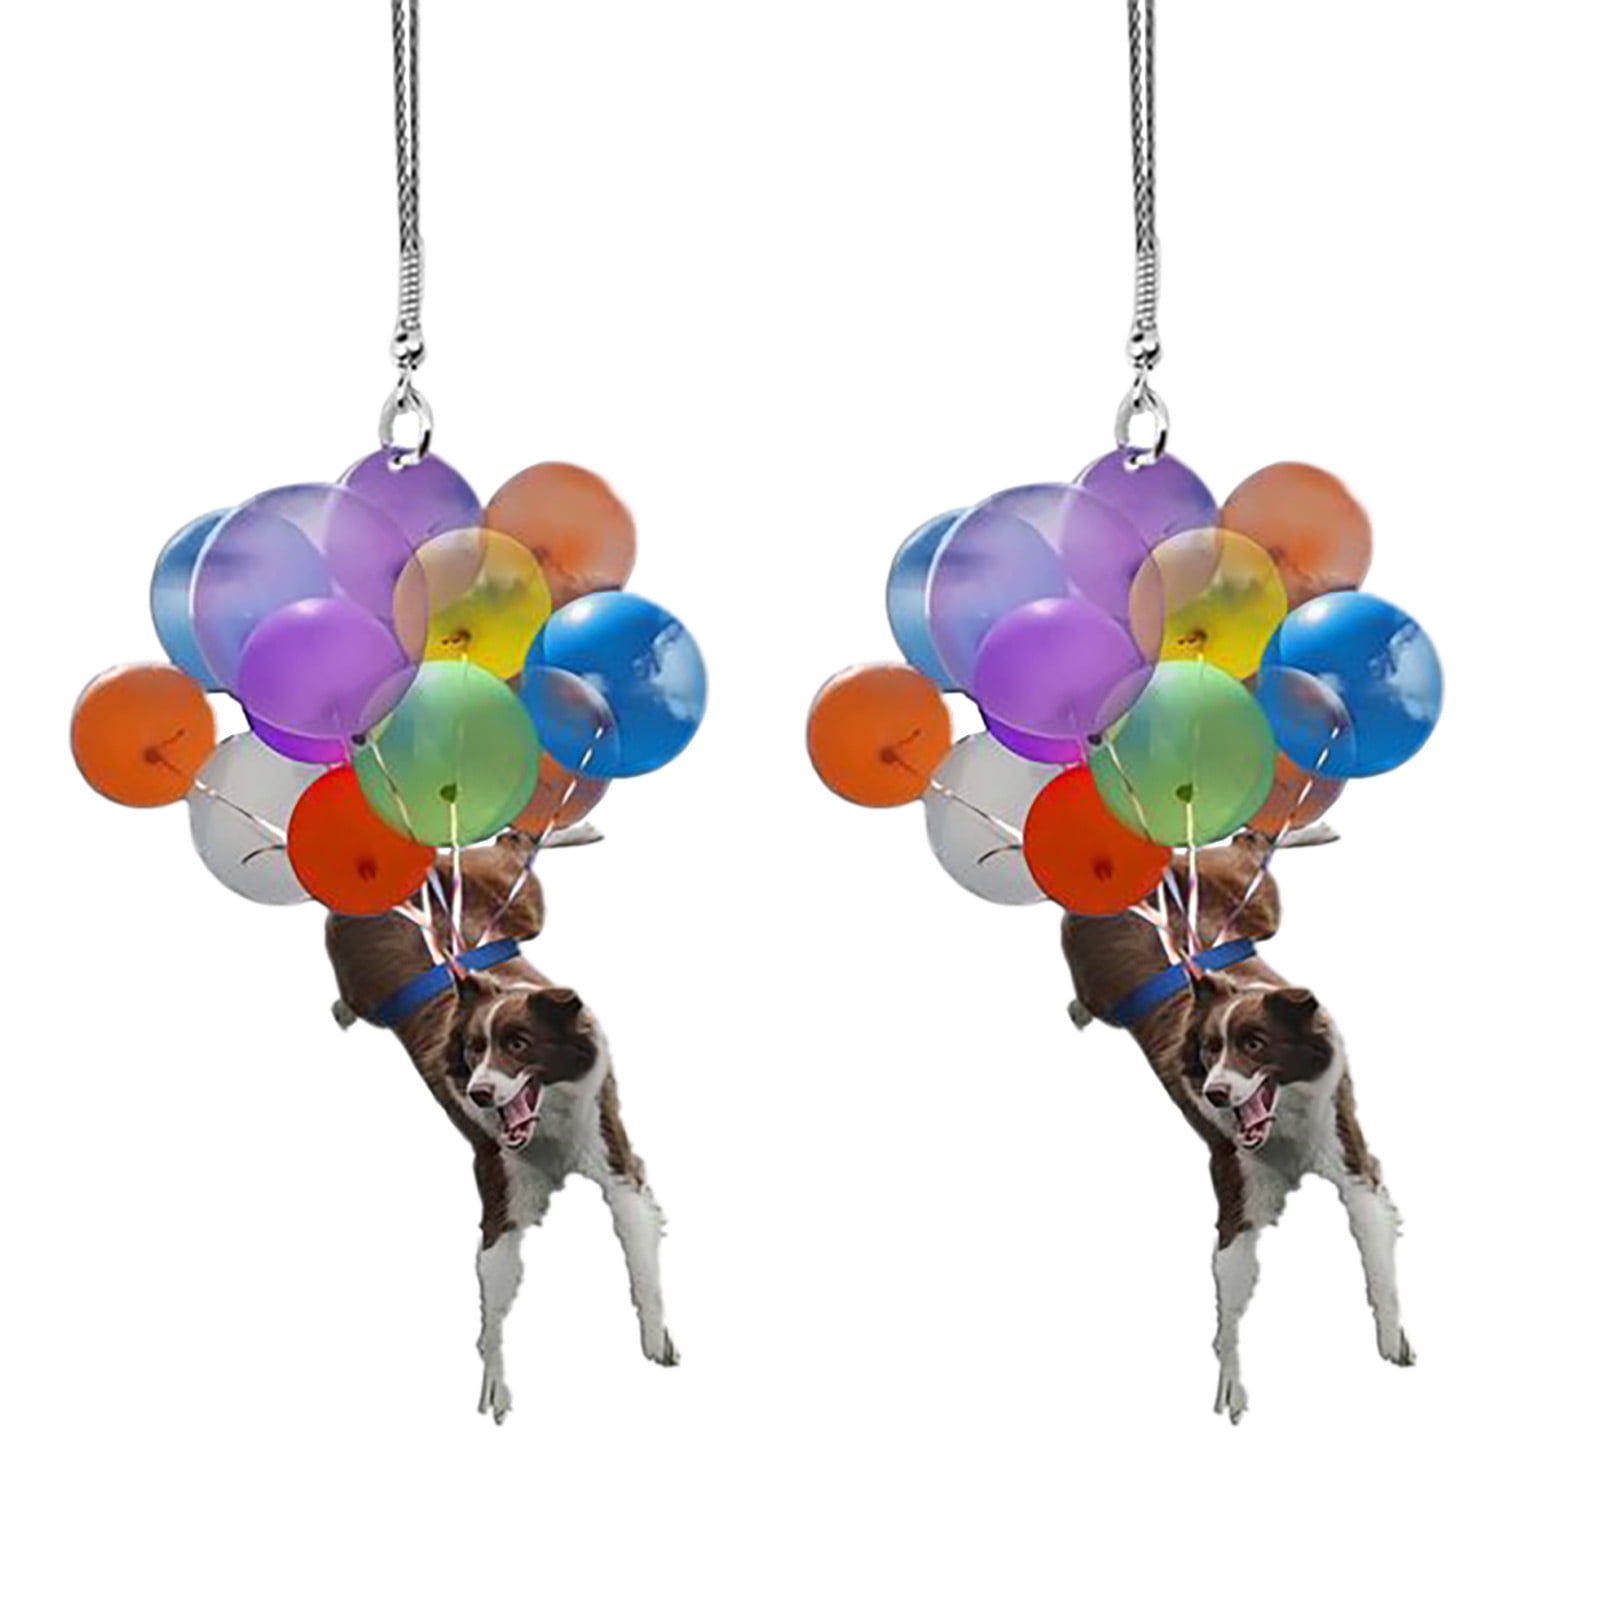 Cute Dog Hanging Ornament with Colorful Balloon Hanging Decoration 